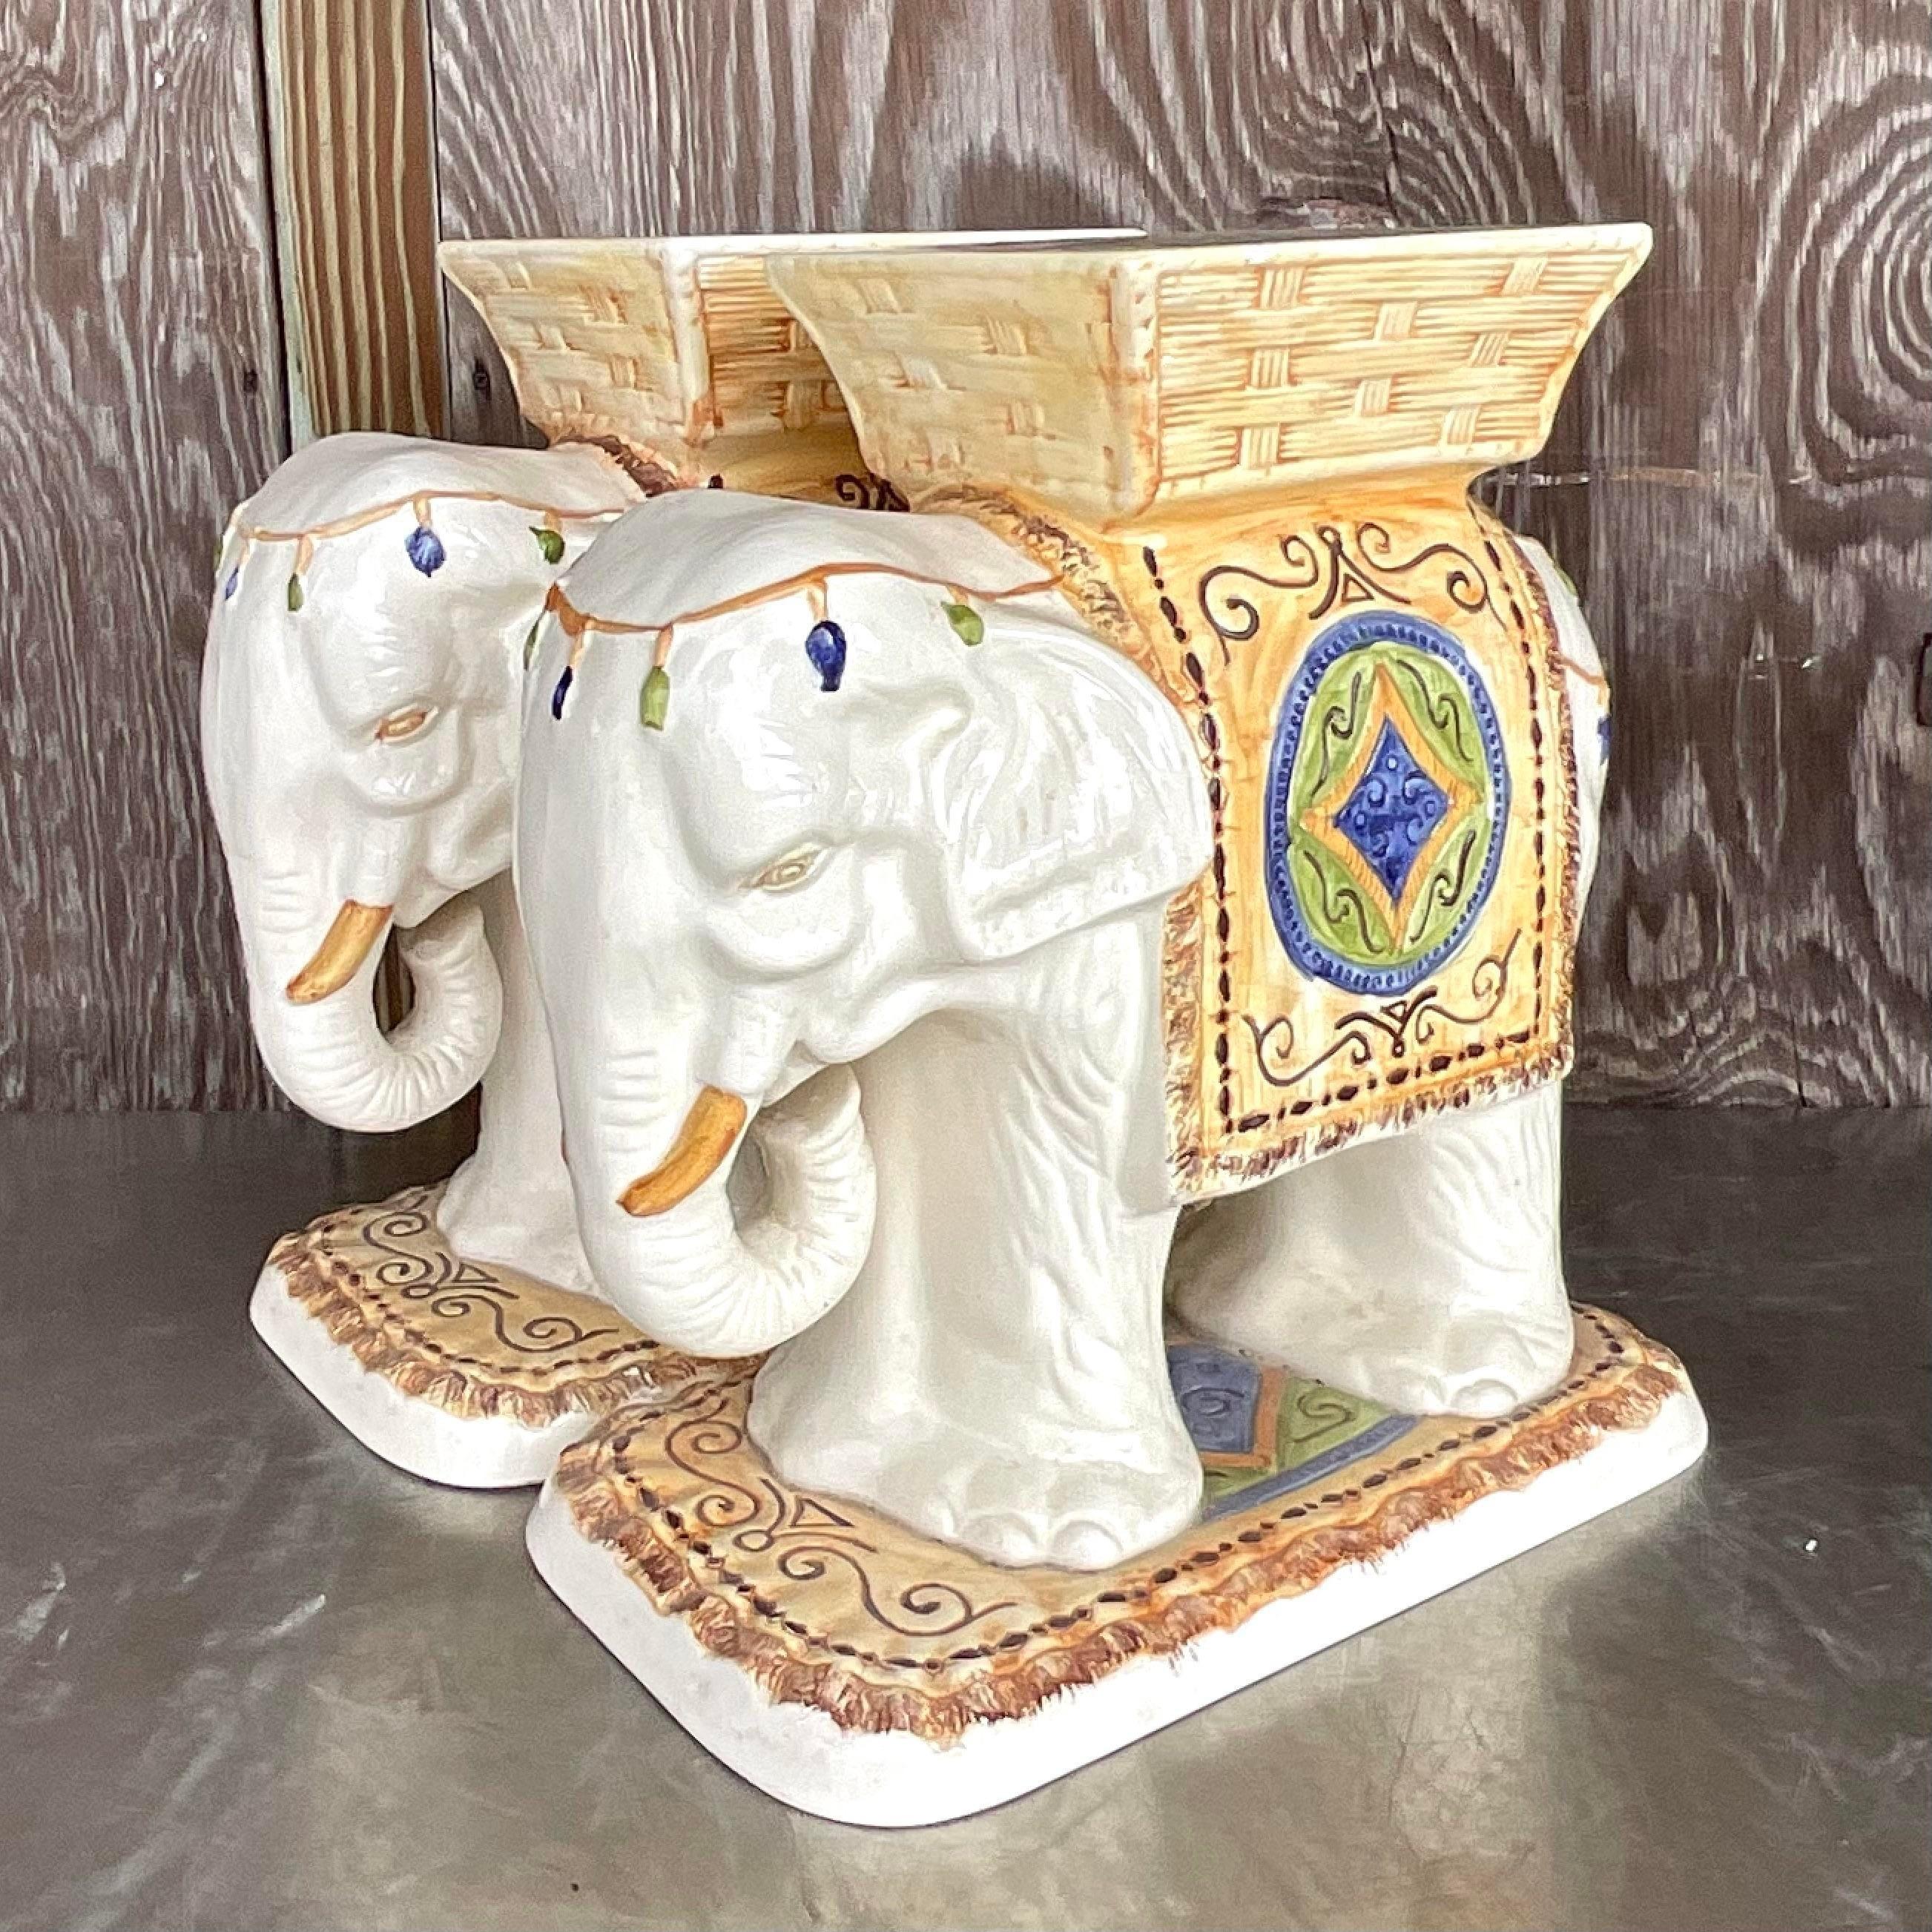 Bohemian Elegance: Vintage Glazed Ceramic Elephant Stools - A Pair. Add a touch of exotic flair to your space with these American-crafted treasures, combining boho charm with timeless sophistication for a statement seating option that captivates